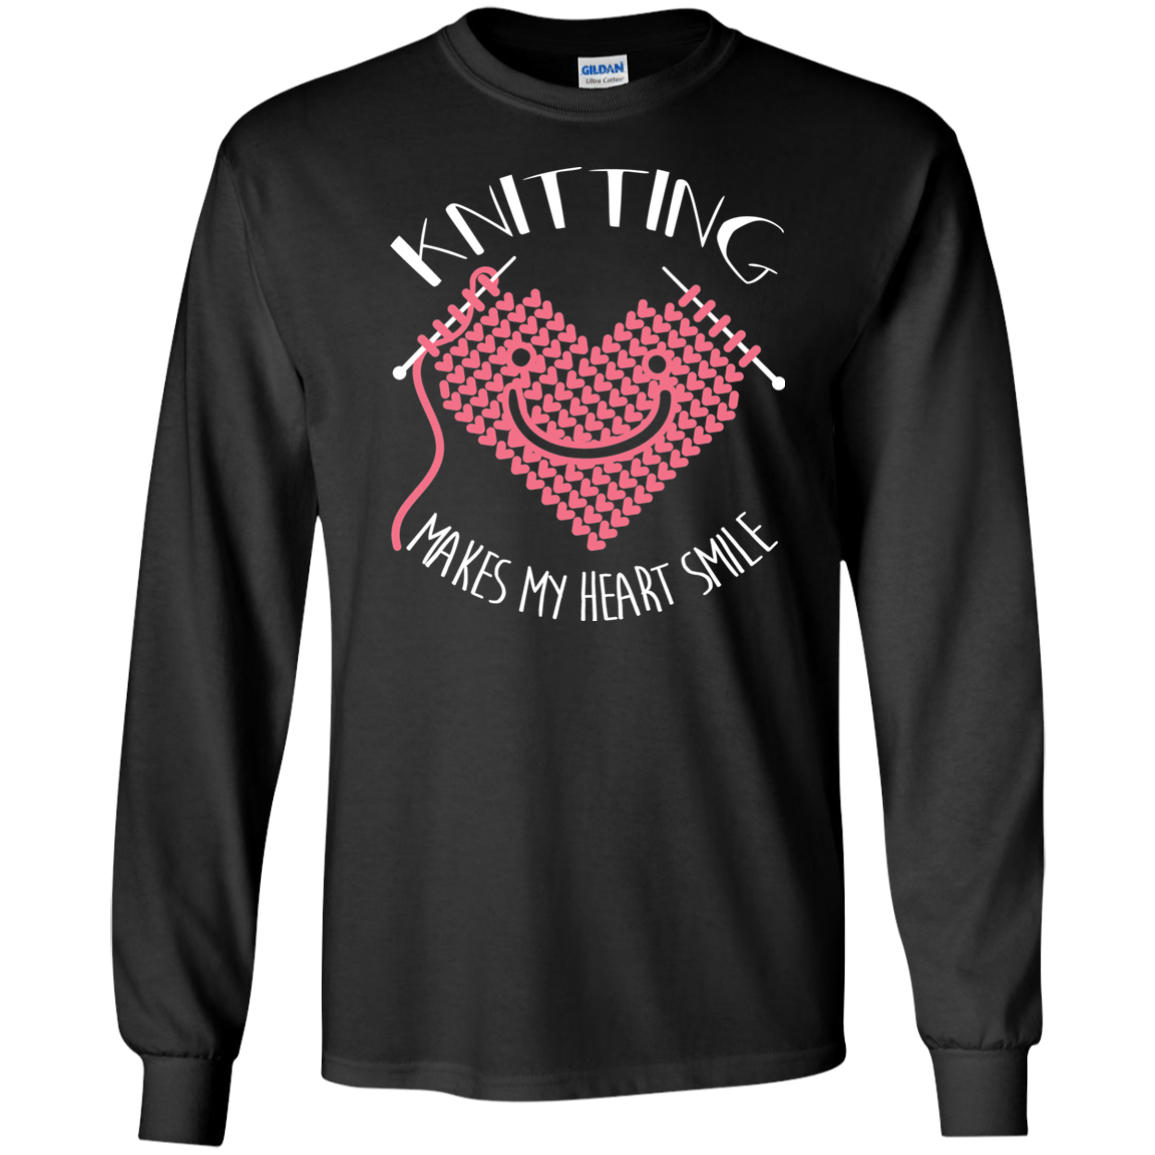 Knitting Makes My Heart Smile LS Ultra Cotton T-Shirt